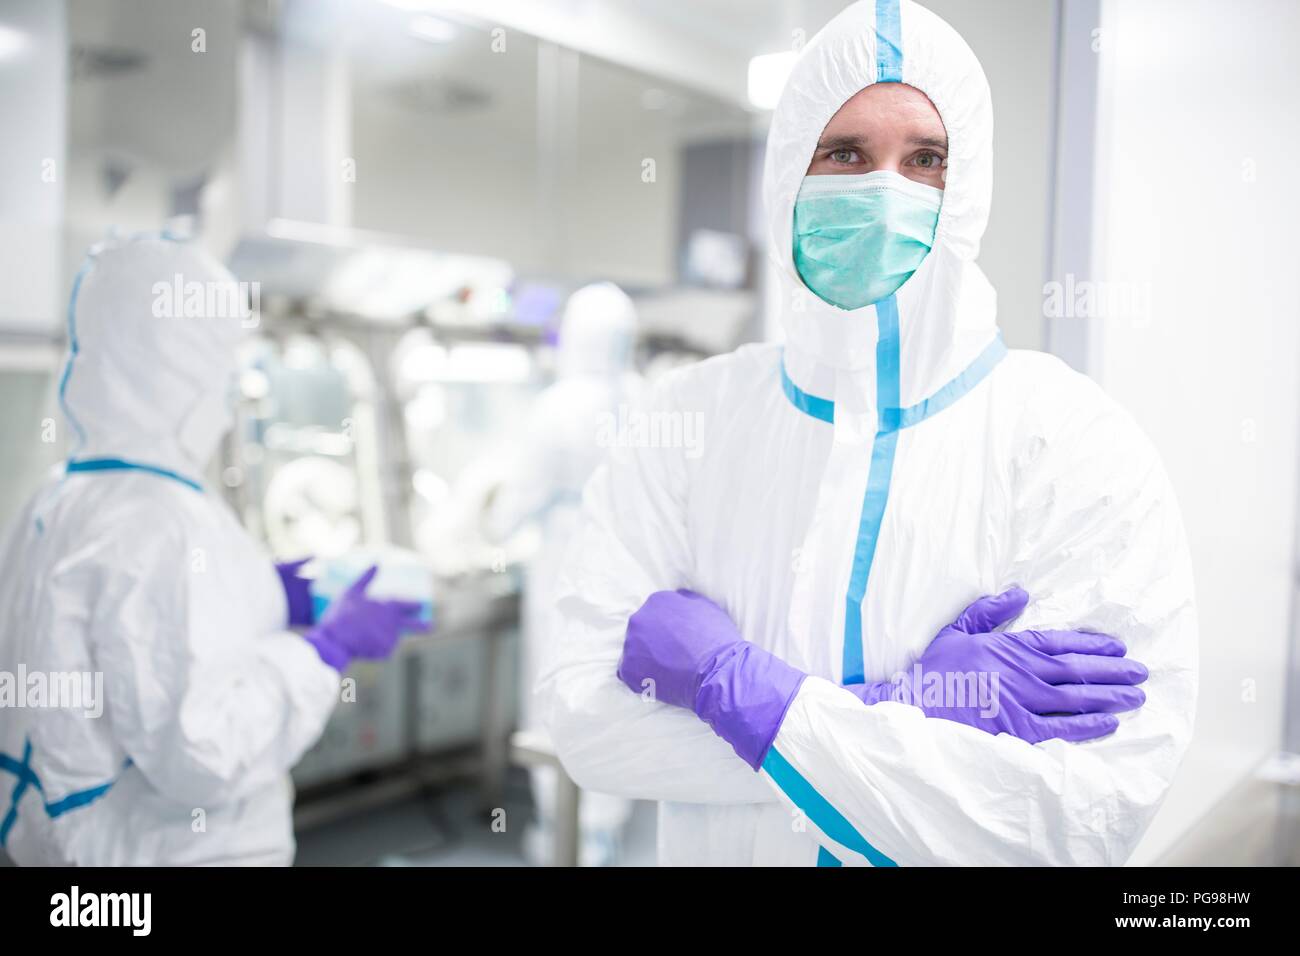 Lab technician wearing a protective suit and face mask in a laboratory that must maintain a sterile environment. Stock Photo